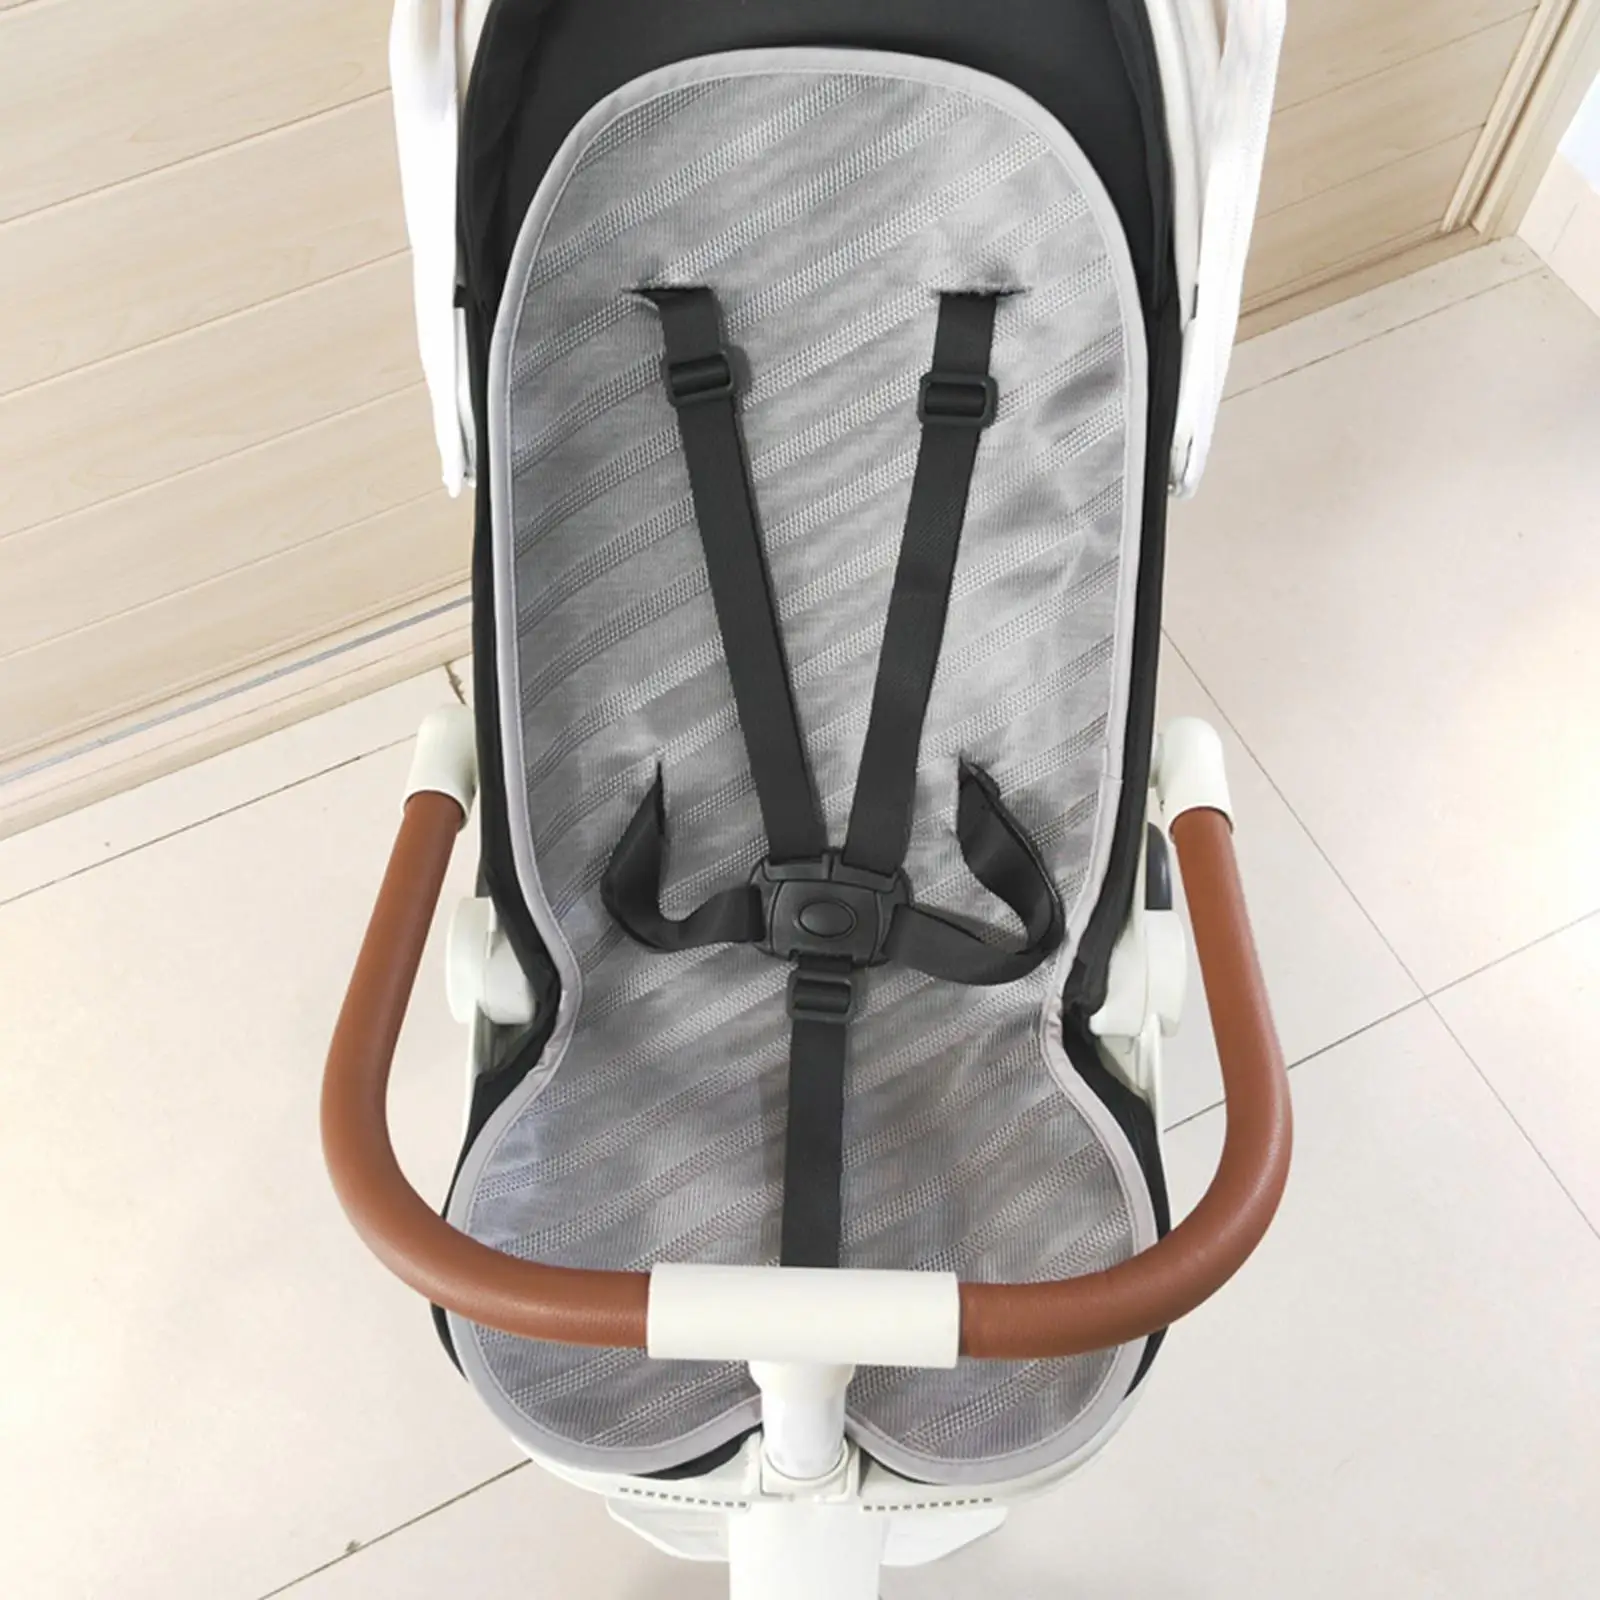 Baby Strollers Cushion Mat Cool Seat Pad Mat Universal Breathable Summer Cooling Seat Pad for Child Safety Seat Strollers